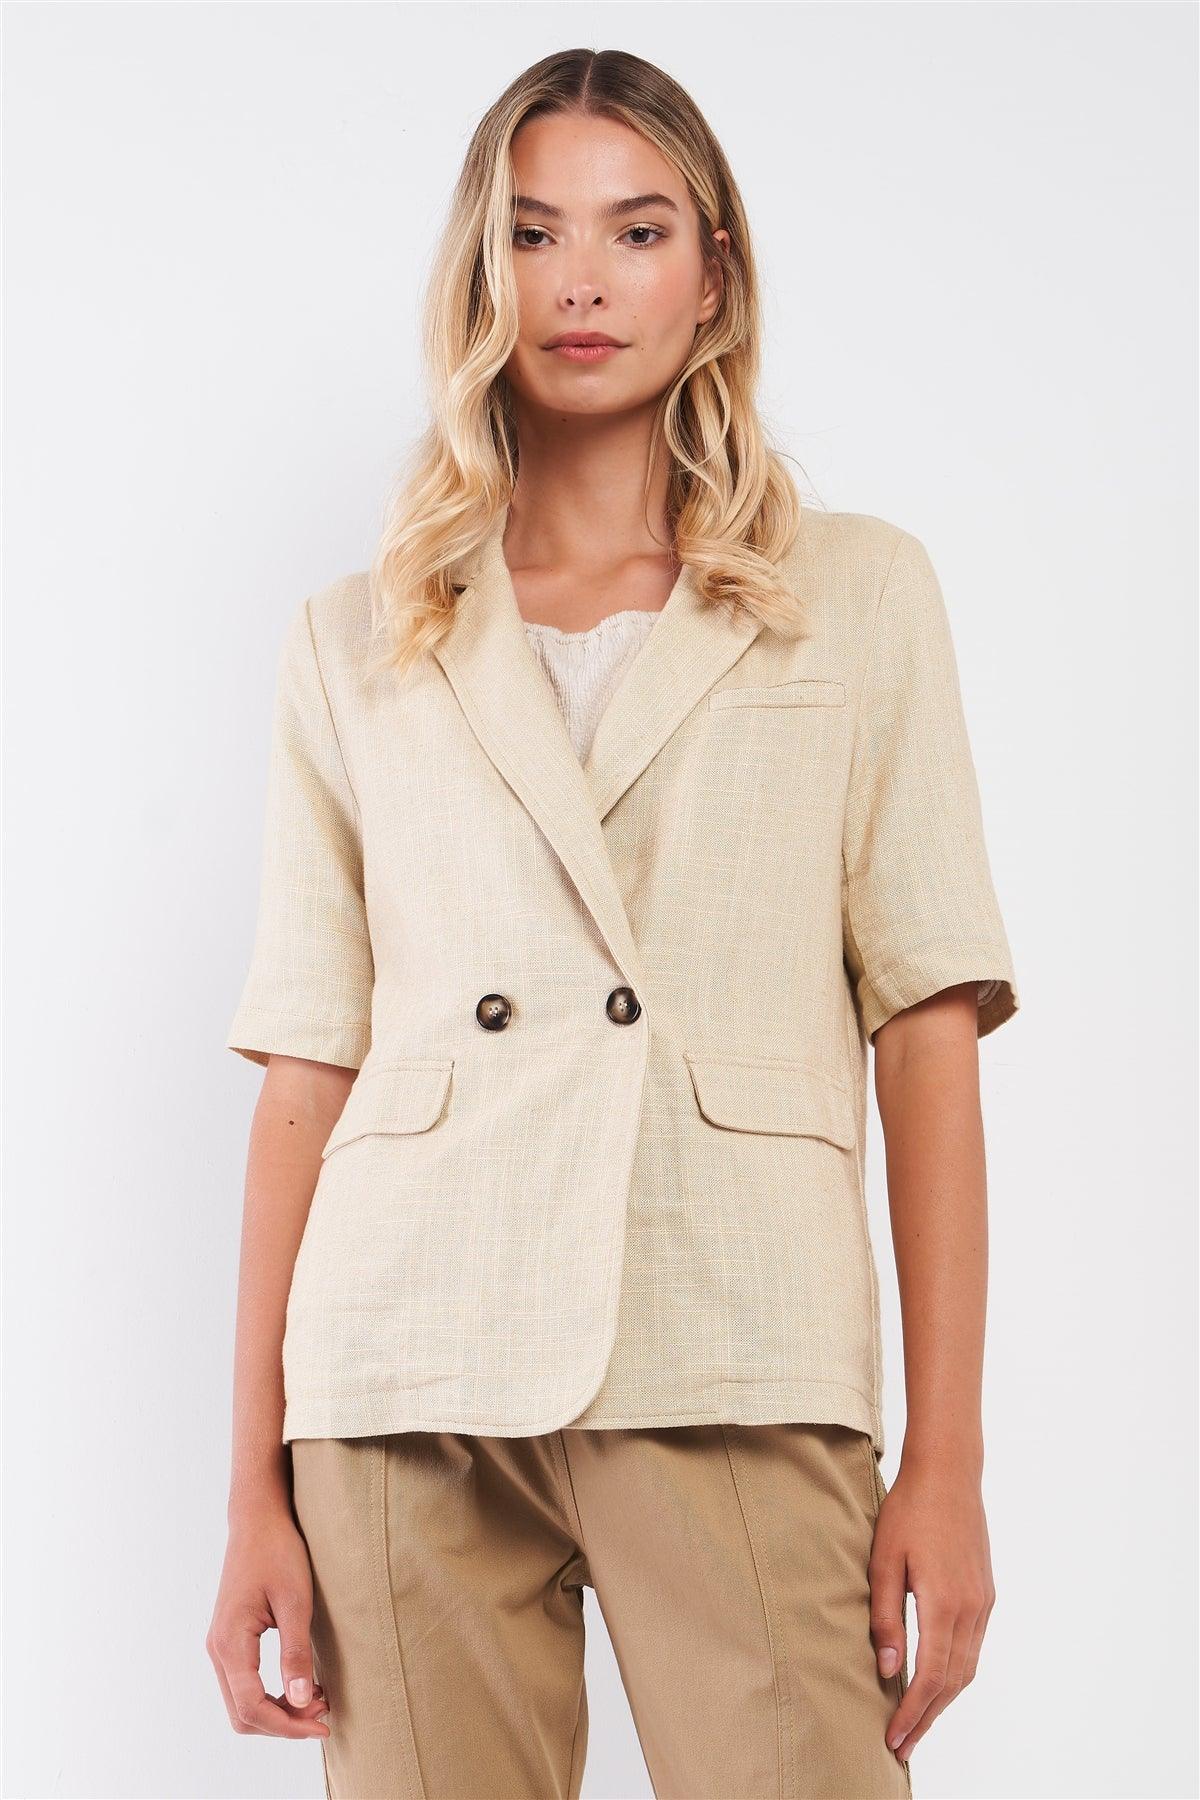 Womens single breasted linen duster coat jacket unlined with free features